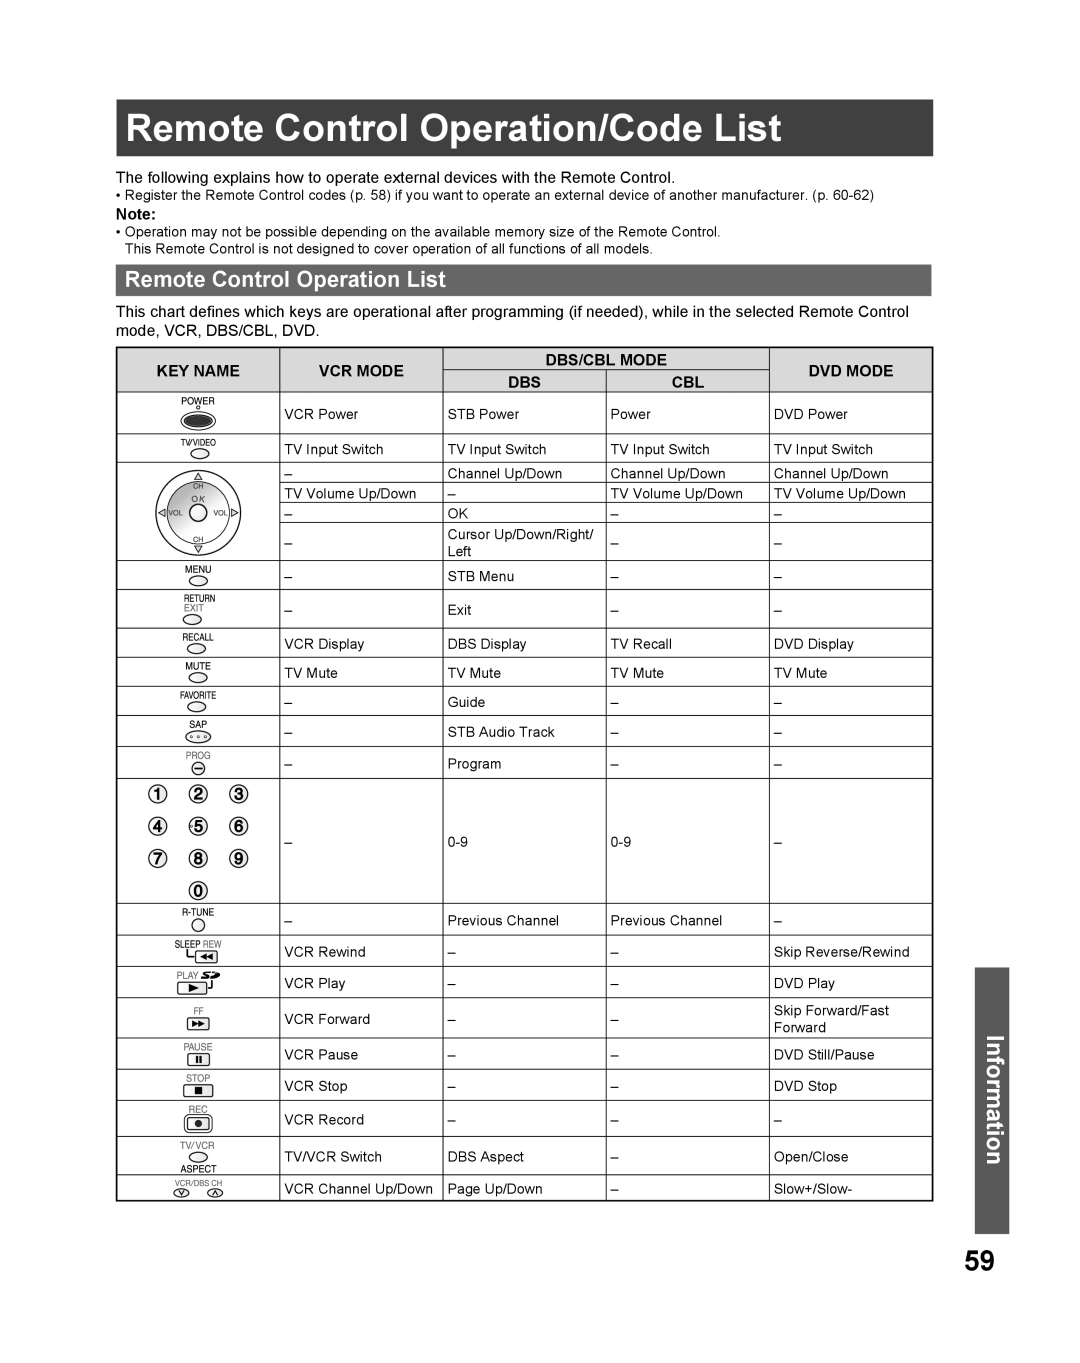 Panasonic PT 61LCX66 Remote Control Operation/Code List, Information, Remote Control Operation List, Key Name, Vcr Mode 